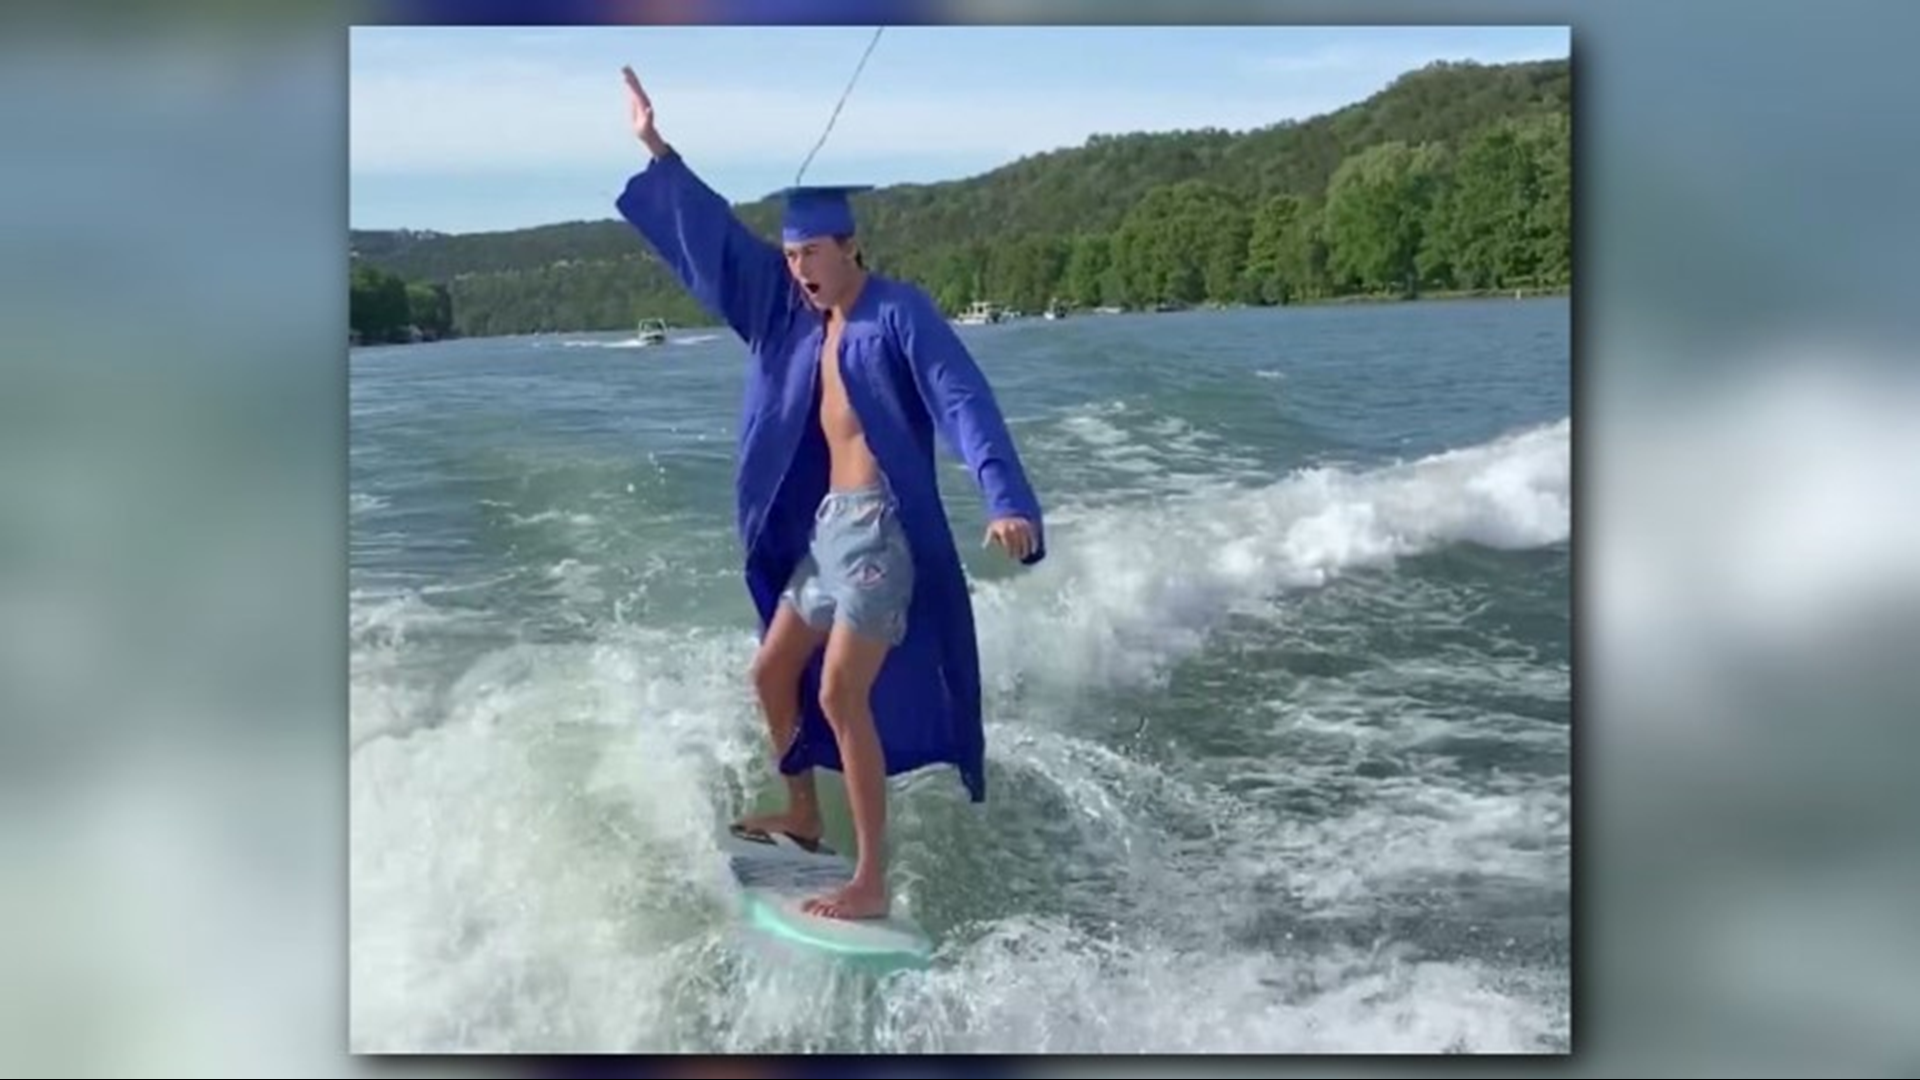 Andrew Mountain celebrated graduation from Austin's Westlake High School by wake surfing in his cap and gown.